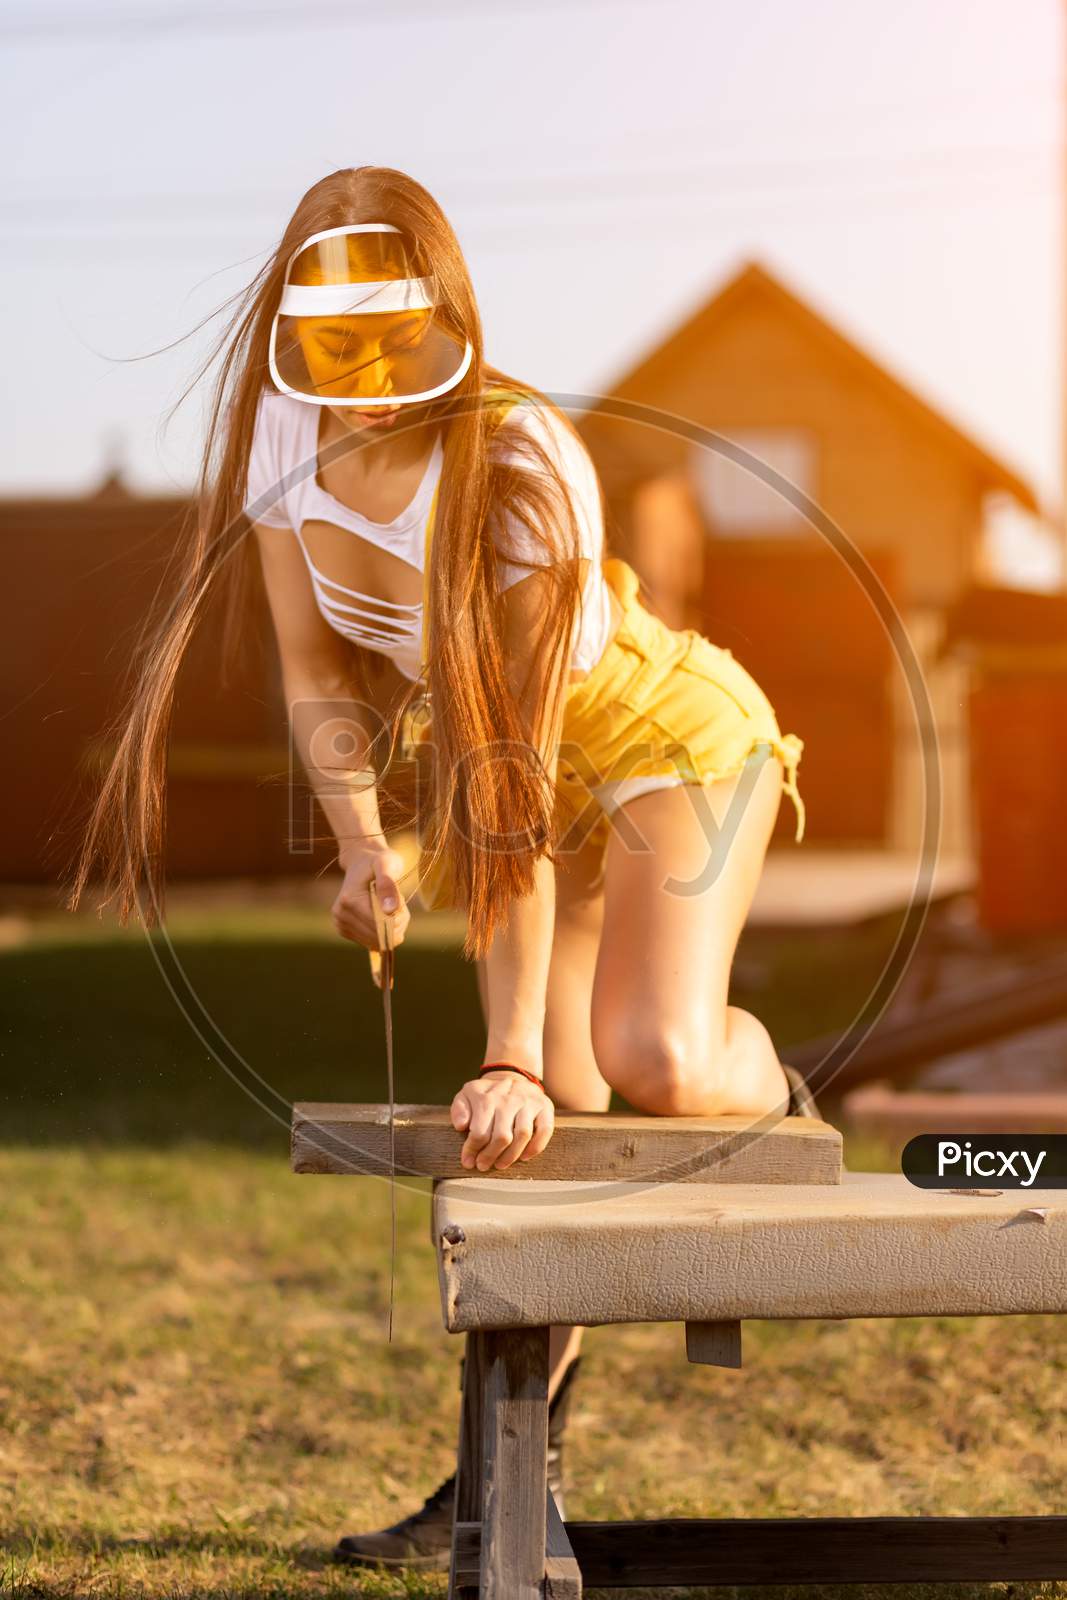 Young Athletic Woman In Jeans And Crop Top Is Sawing Wood In A Rustic Atmosphere On A Warm Summer Day, In The Background A Wooden House And A Lawn